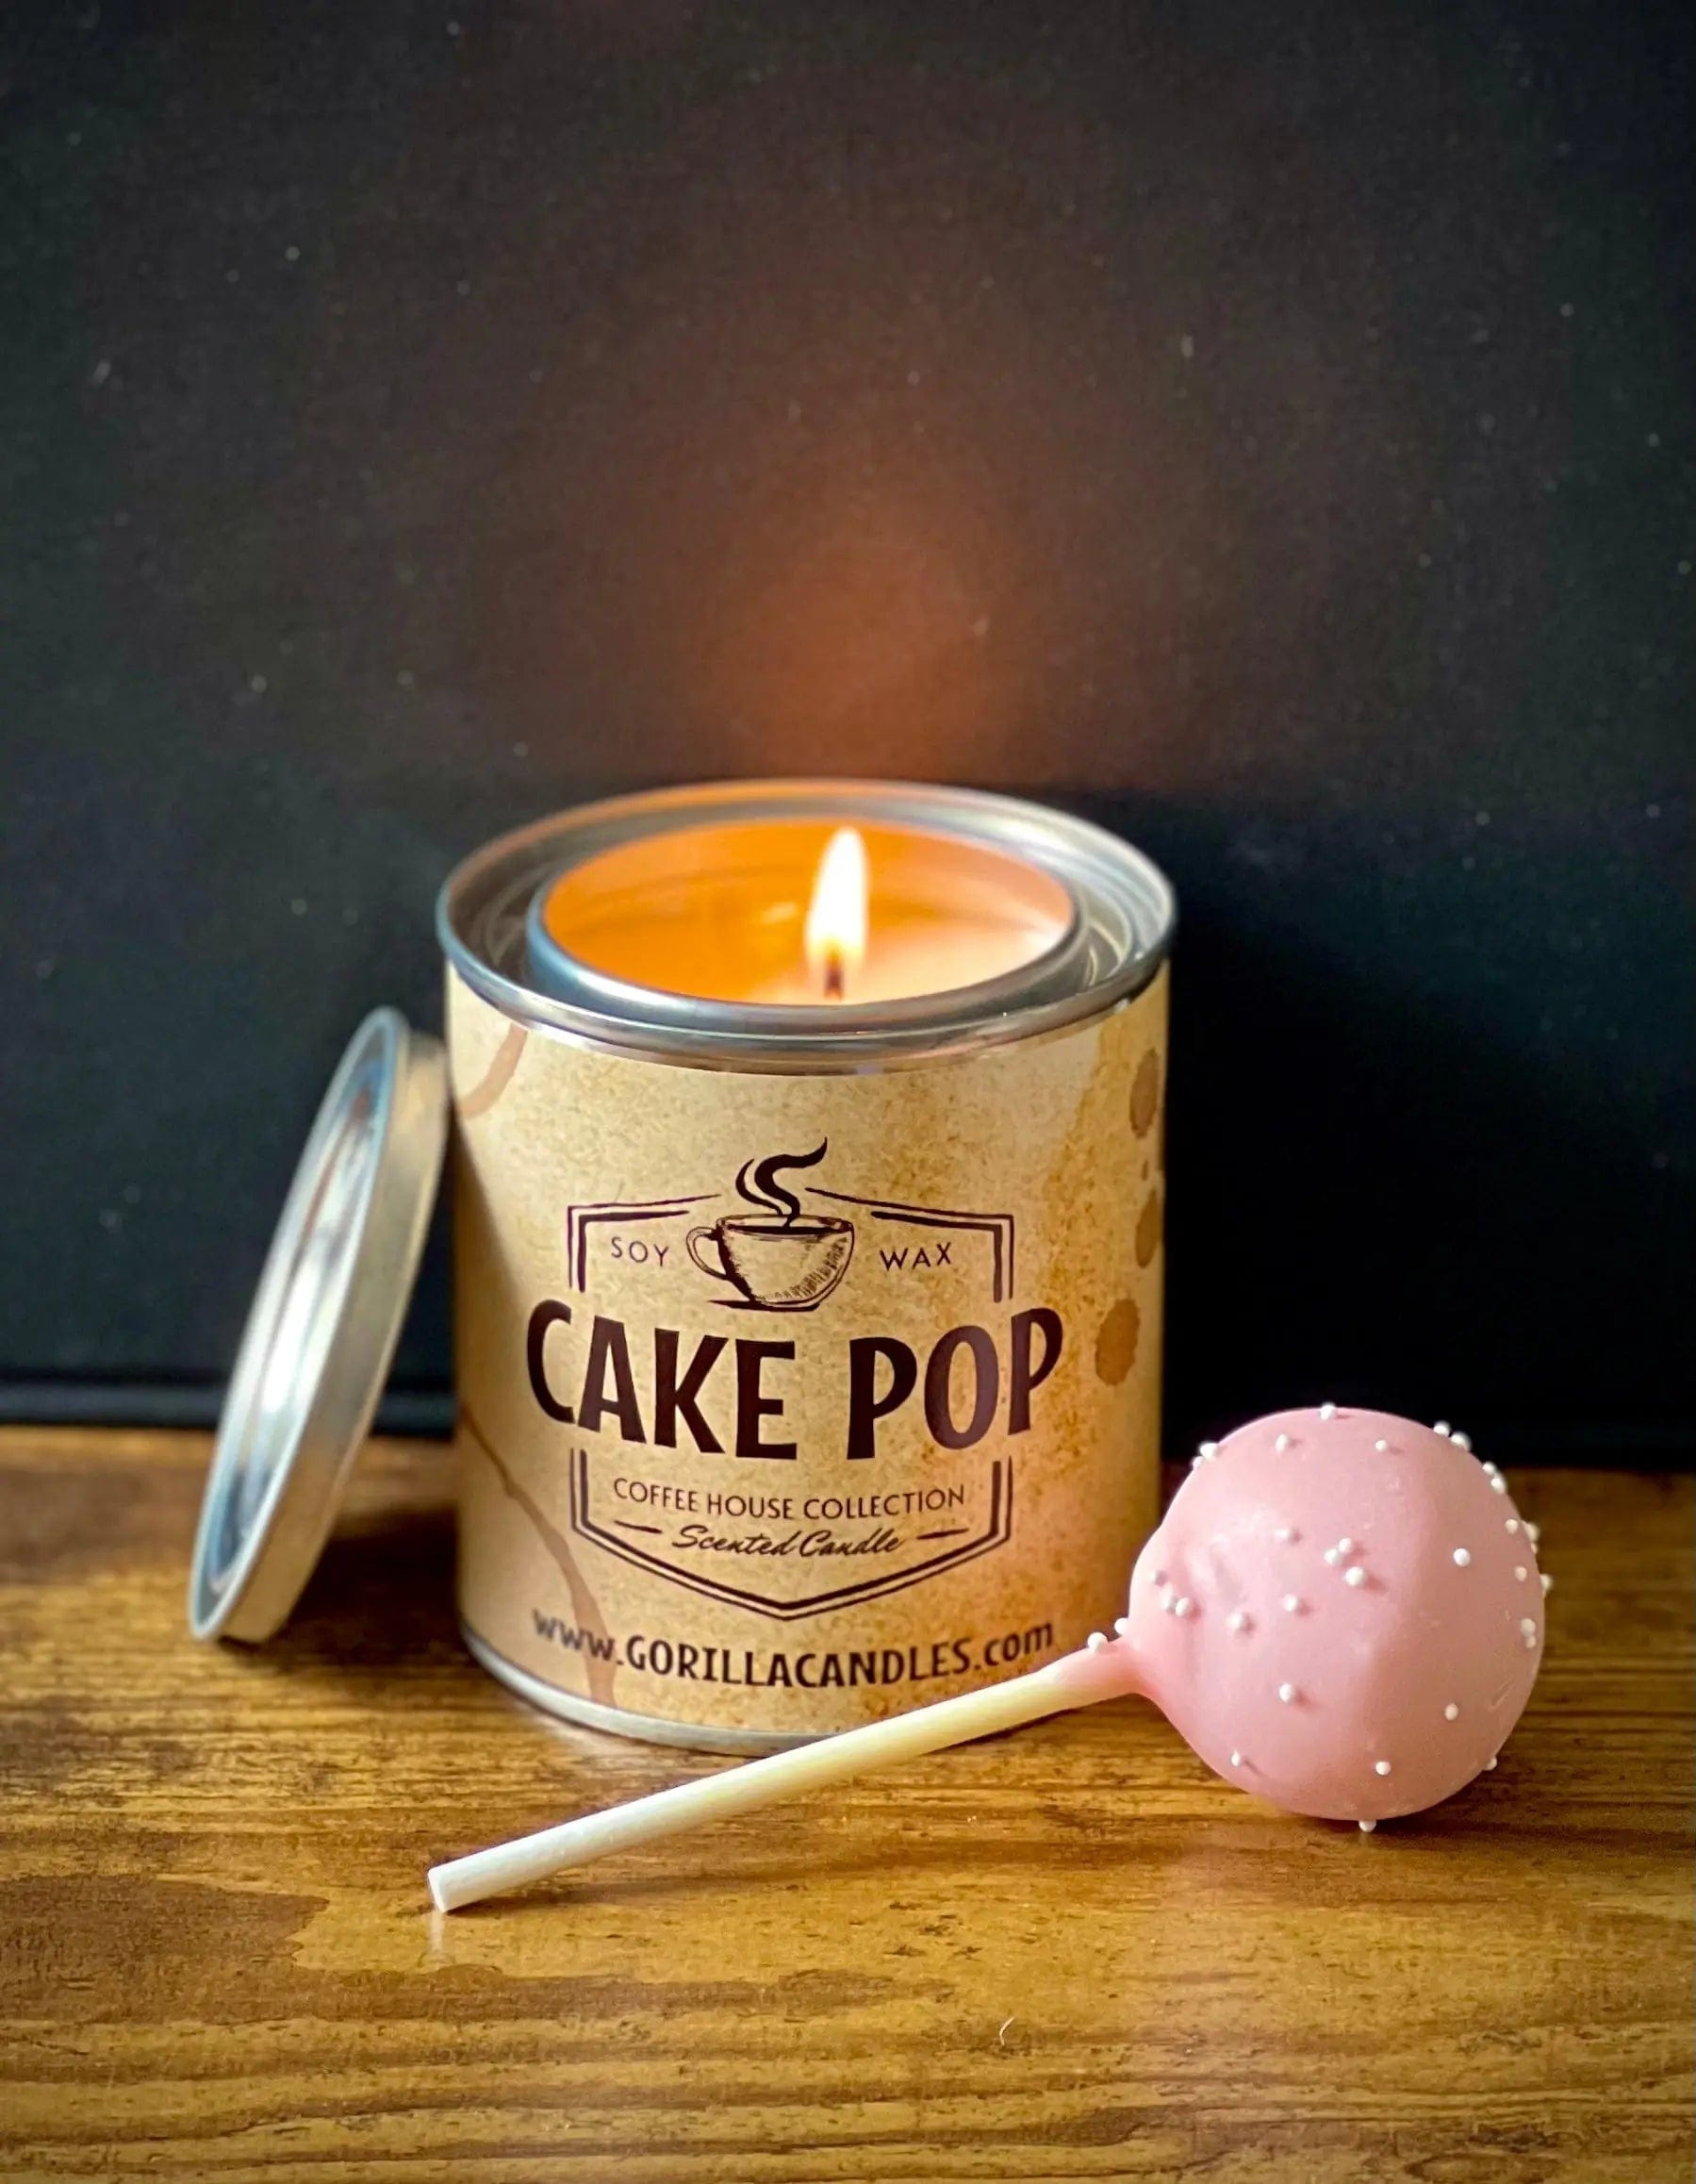 Cake Pop Scented Candle Novelty 16.95 MPGD Corp Merchandise